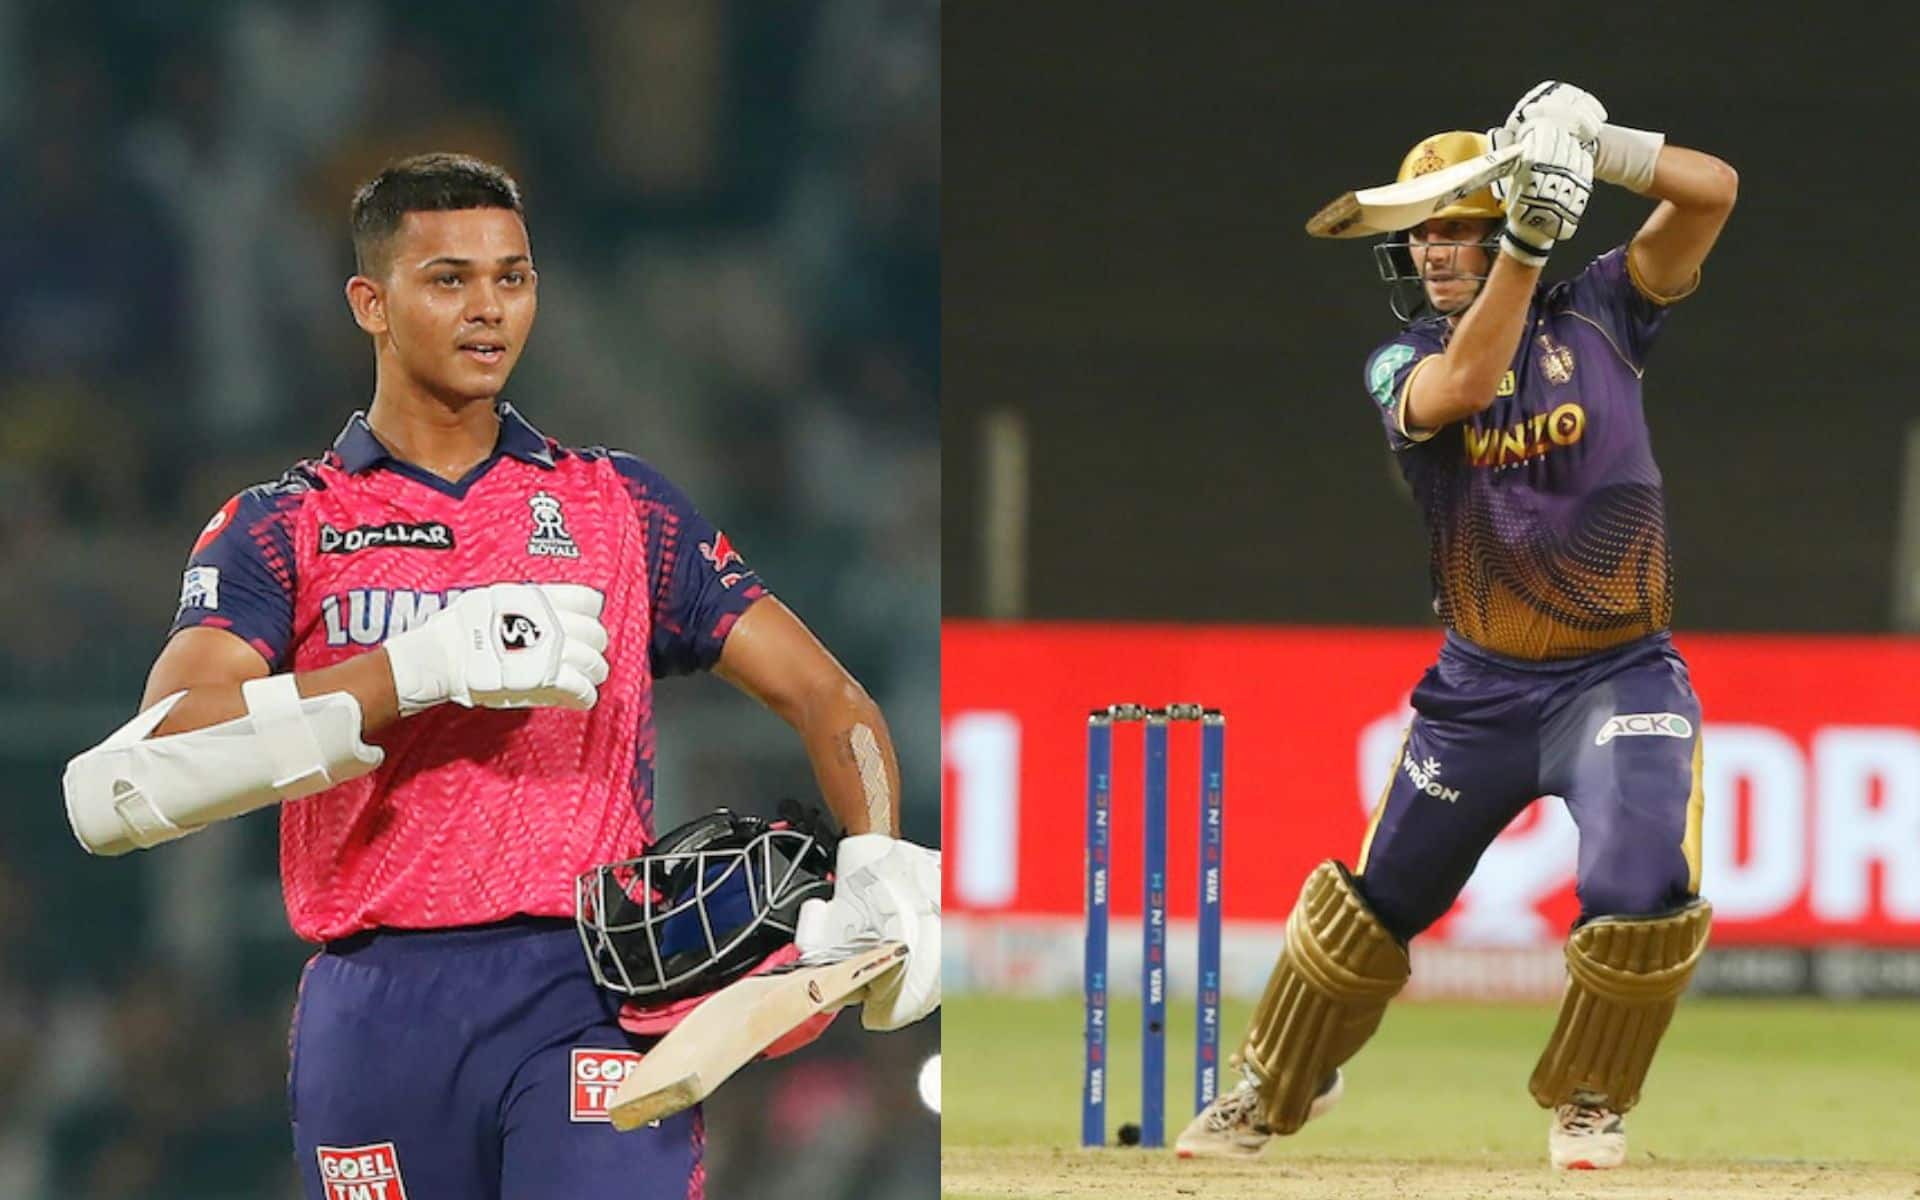 Yashasvi Jaiswal and Pat Cummins hold the records of fastest fifties in IPL (X.COM)